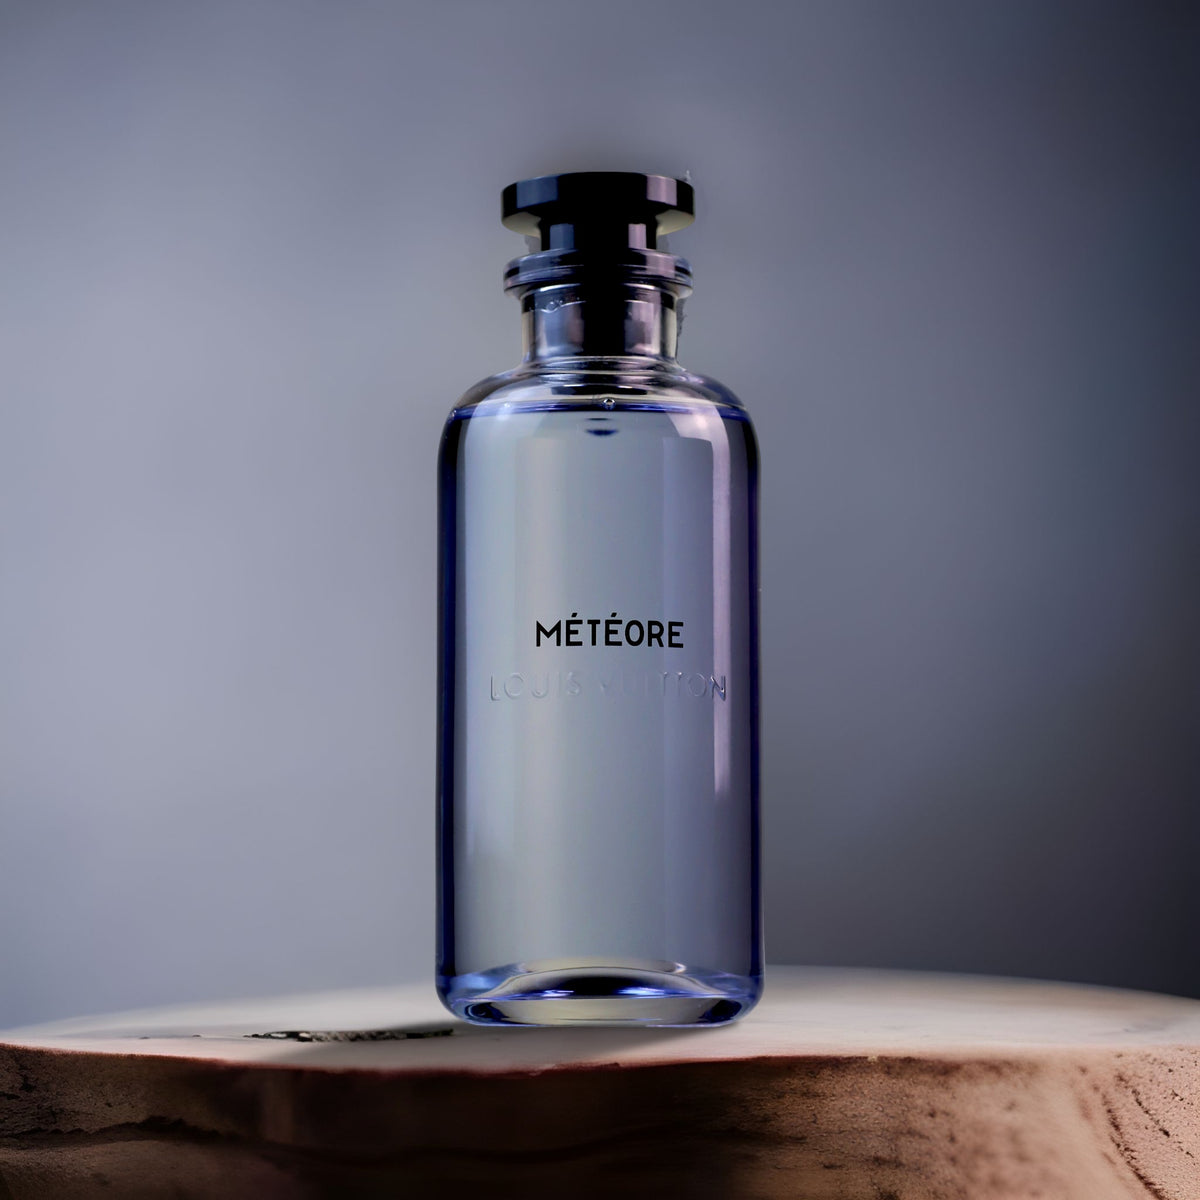 Scales Speaks  Louis Vuitton - Meteore EDP Fragrance Review 